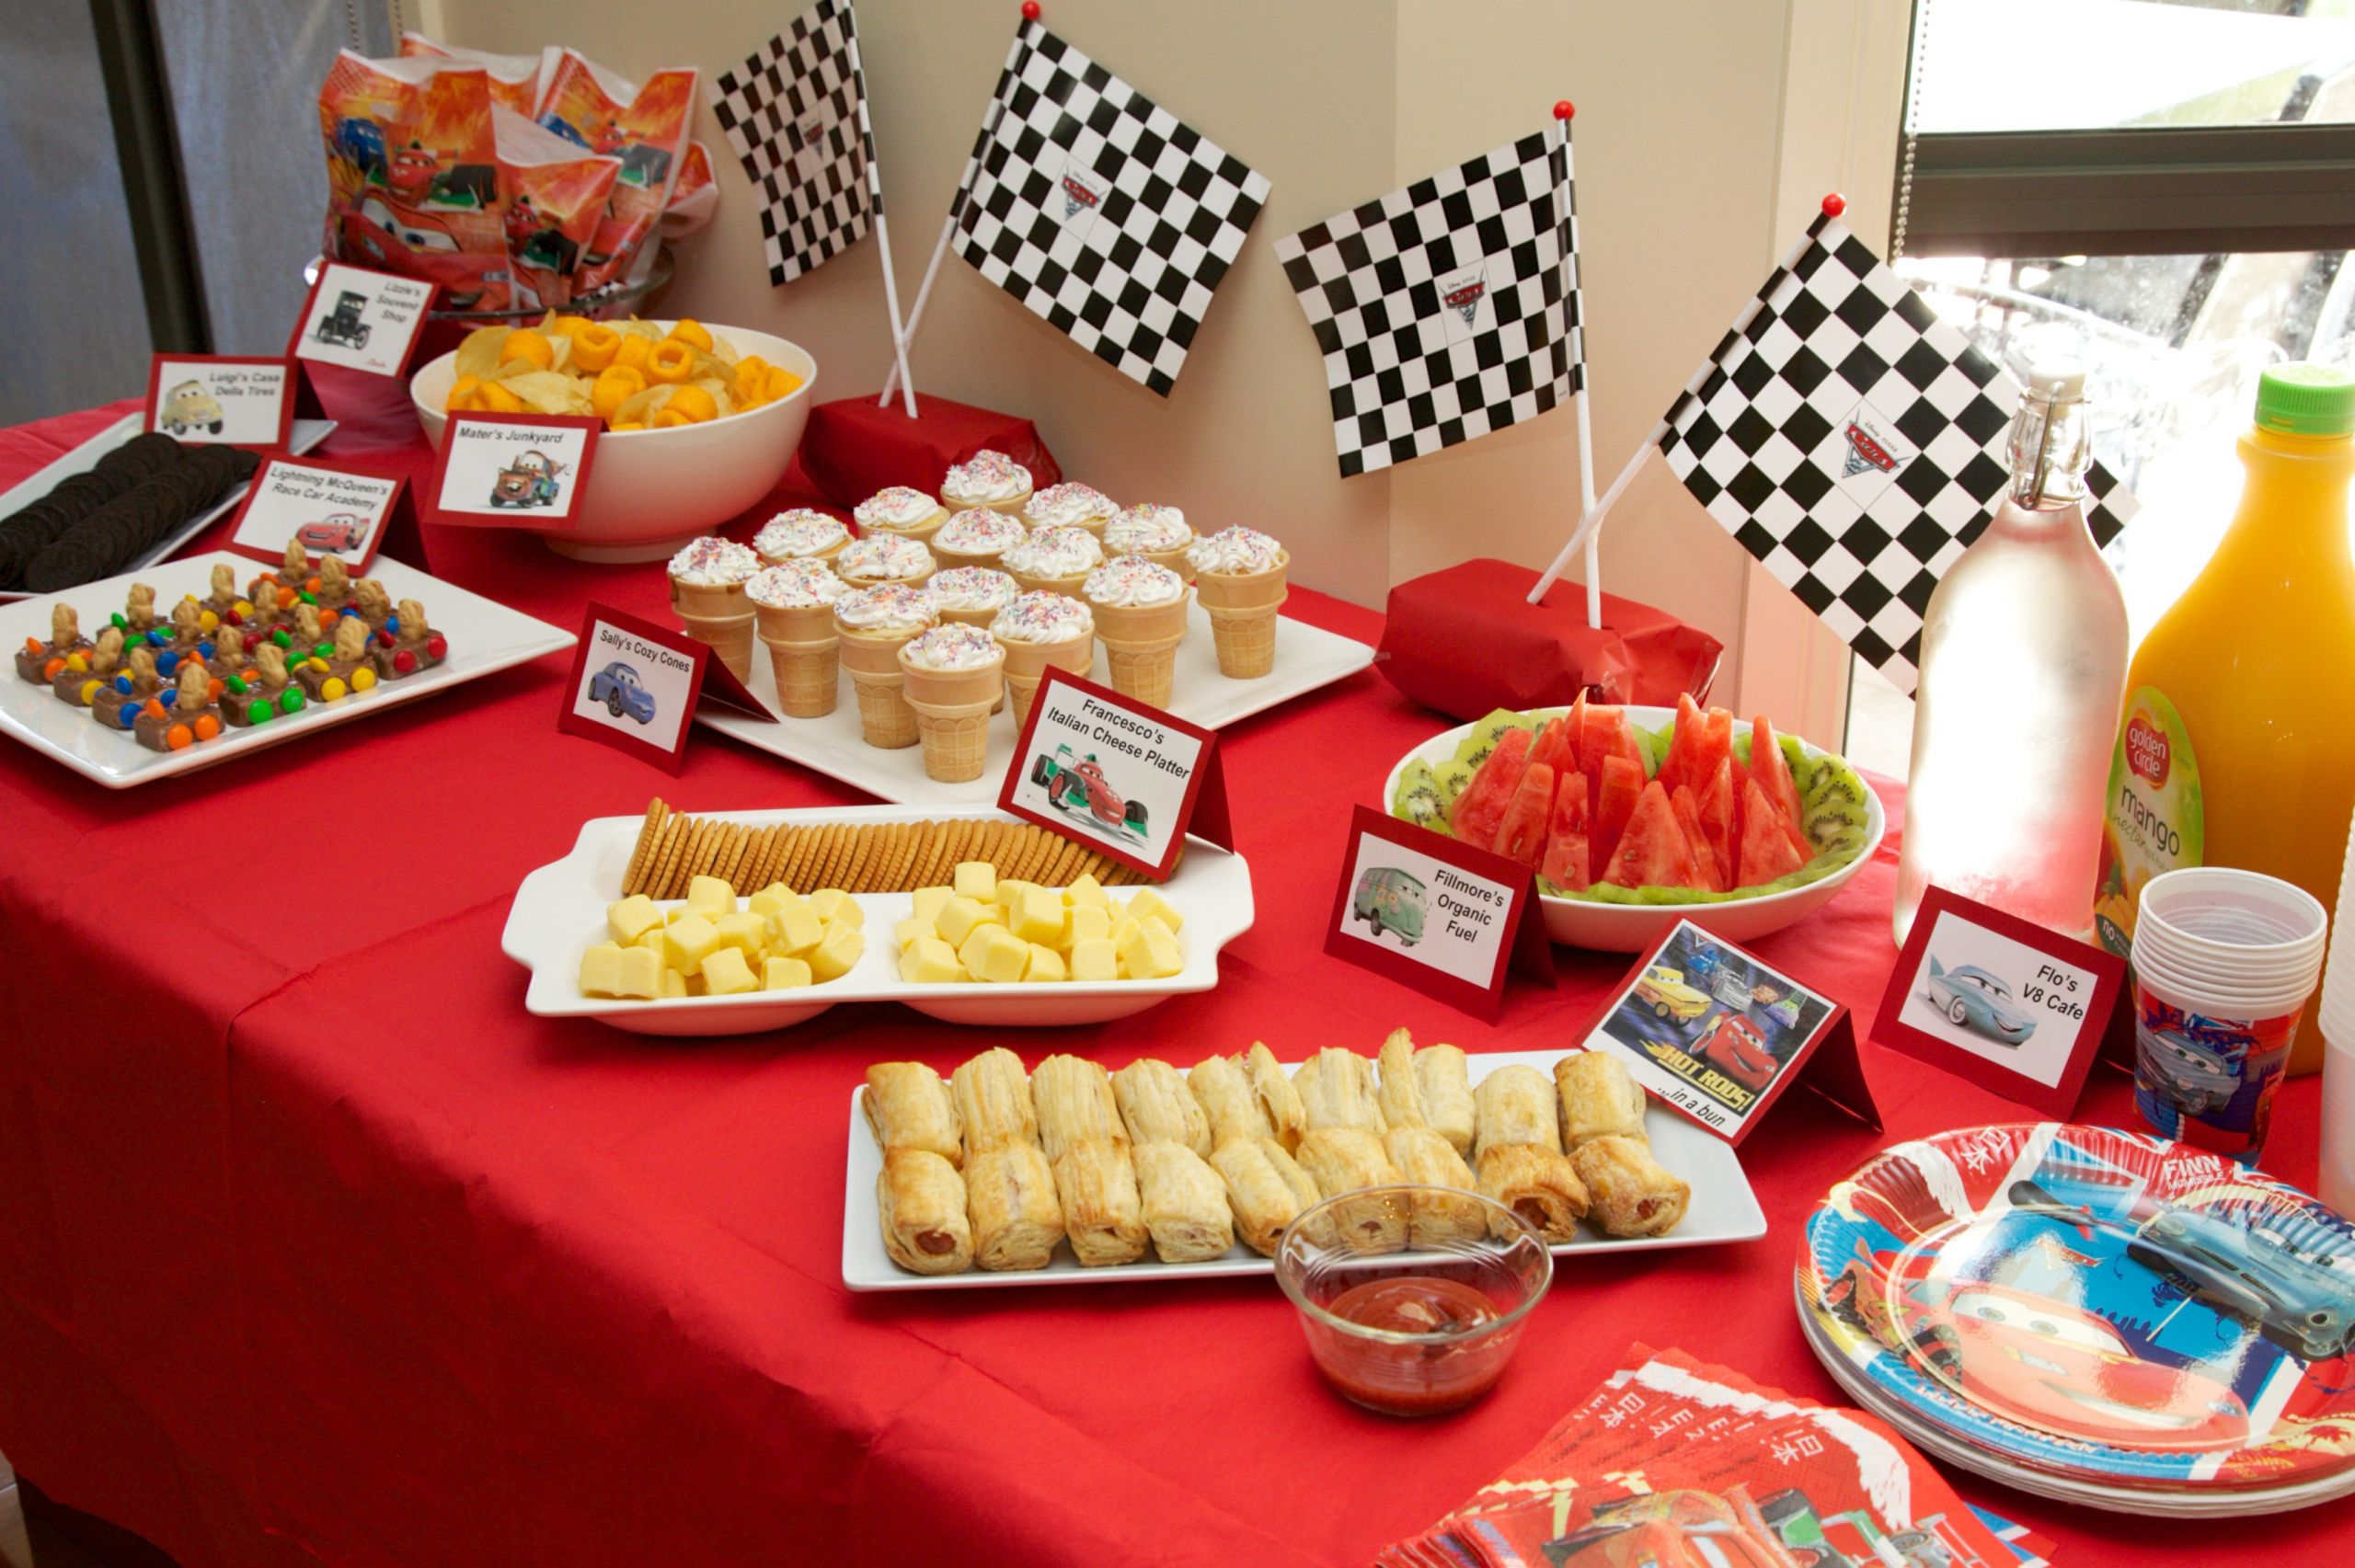 Food Ideas For Kids Birthday Party
 Disney Cars Birthday Party on a Bud Kidz Activities